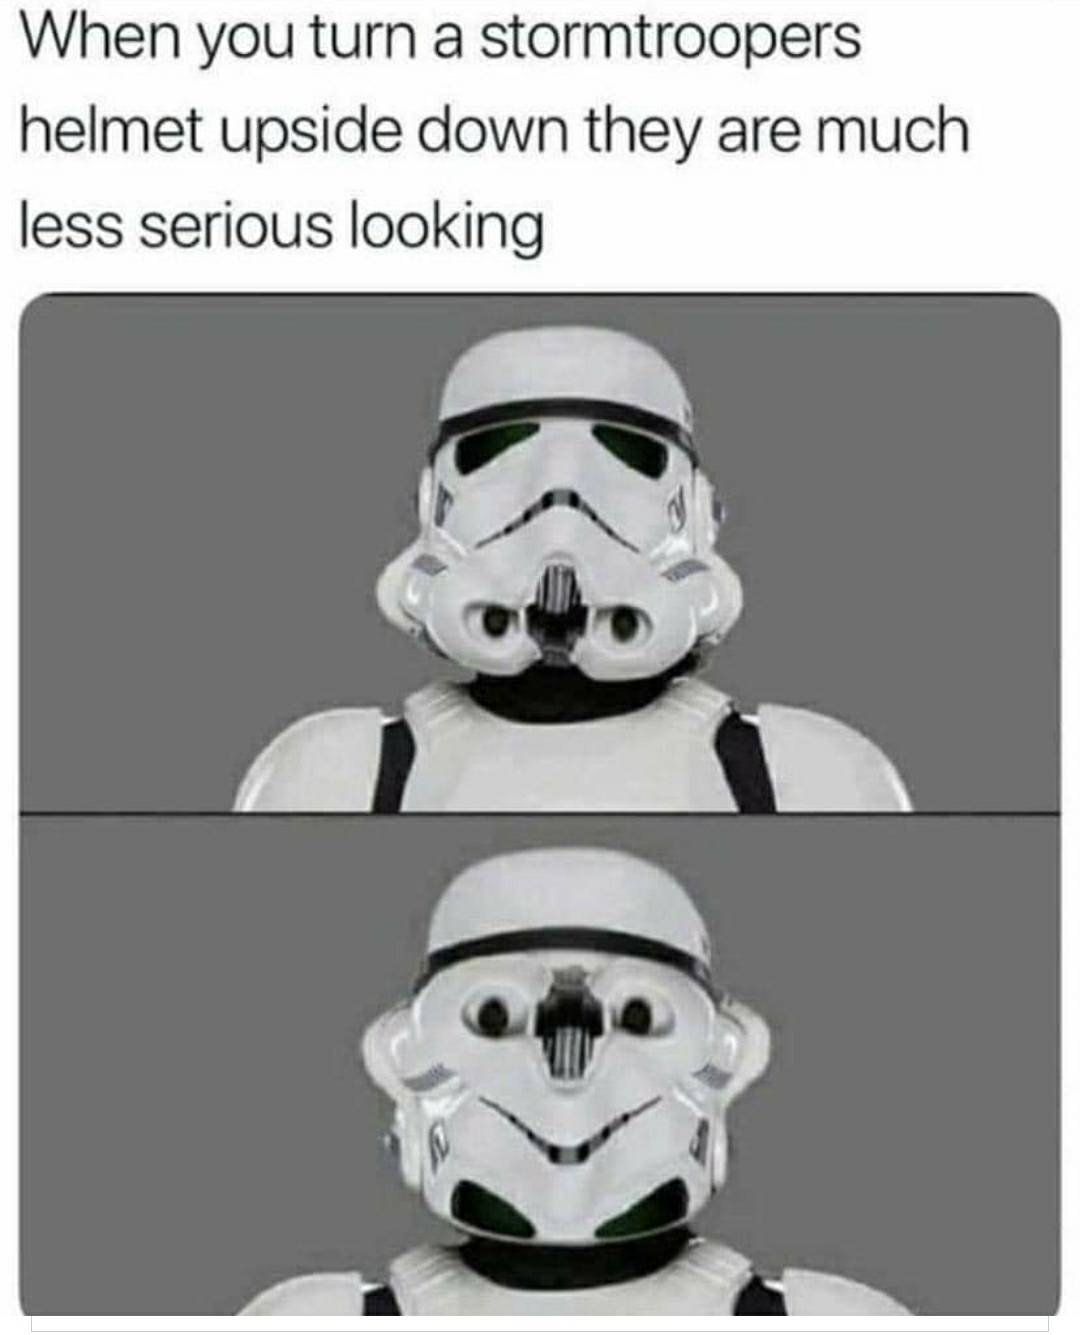 stormtroopers actually look friendly - When you turn a stormtroopers helmet upside down they are much less serious looking